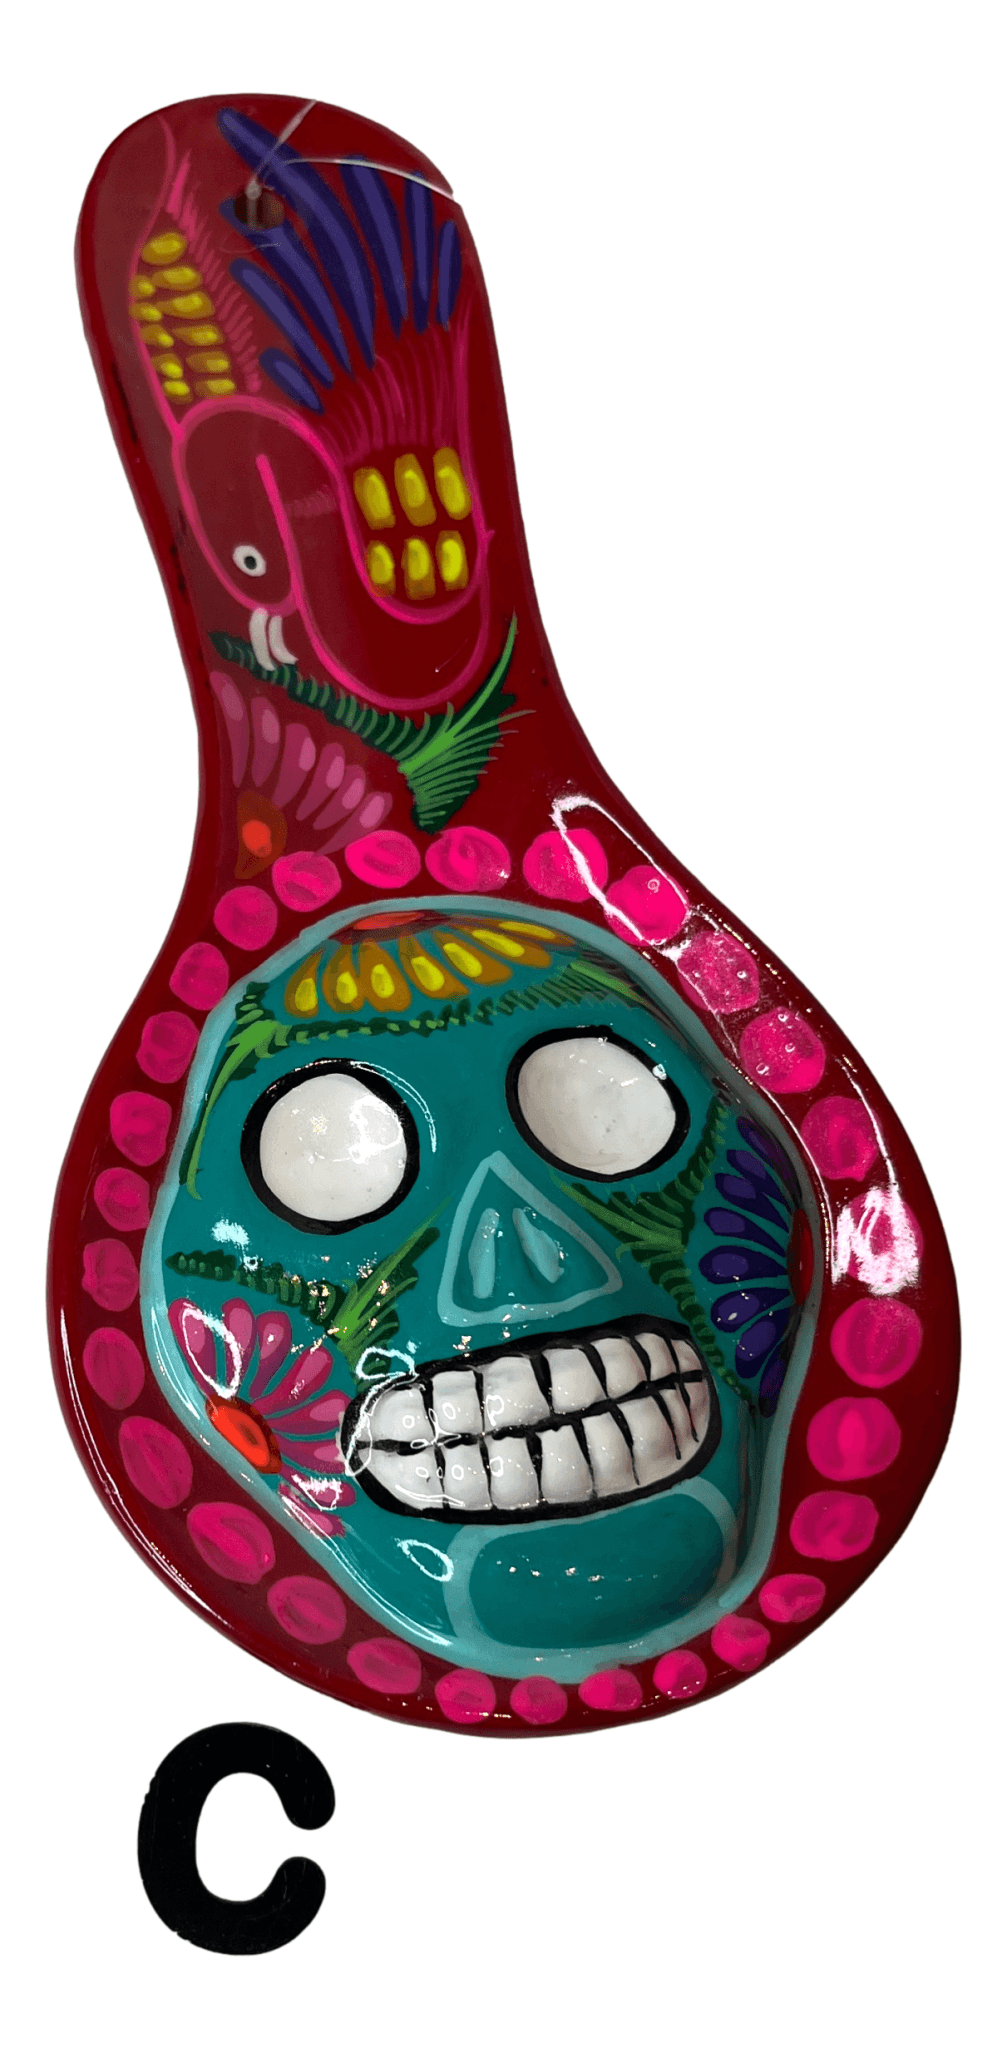 Spoon Rest  Ceramic Glazed Handcrafted By Skilled Mexican Artisans L:9.5 inches X W: 4 inches - Ysleta Mission Gift Shop- VOTED El Paso's Best Gift Shop